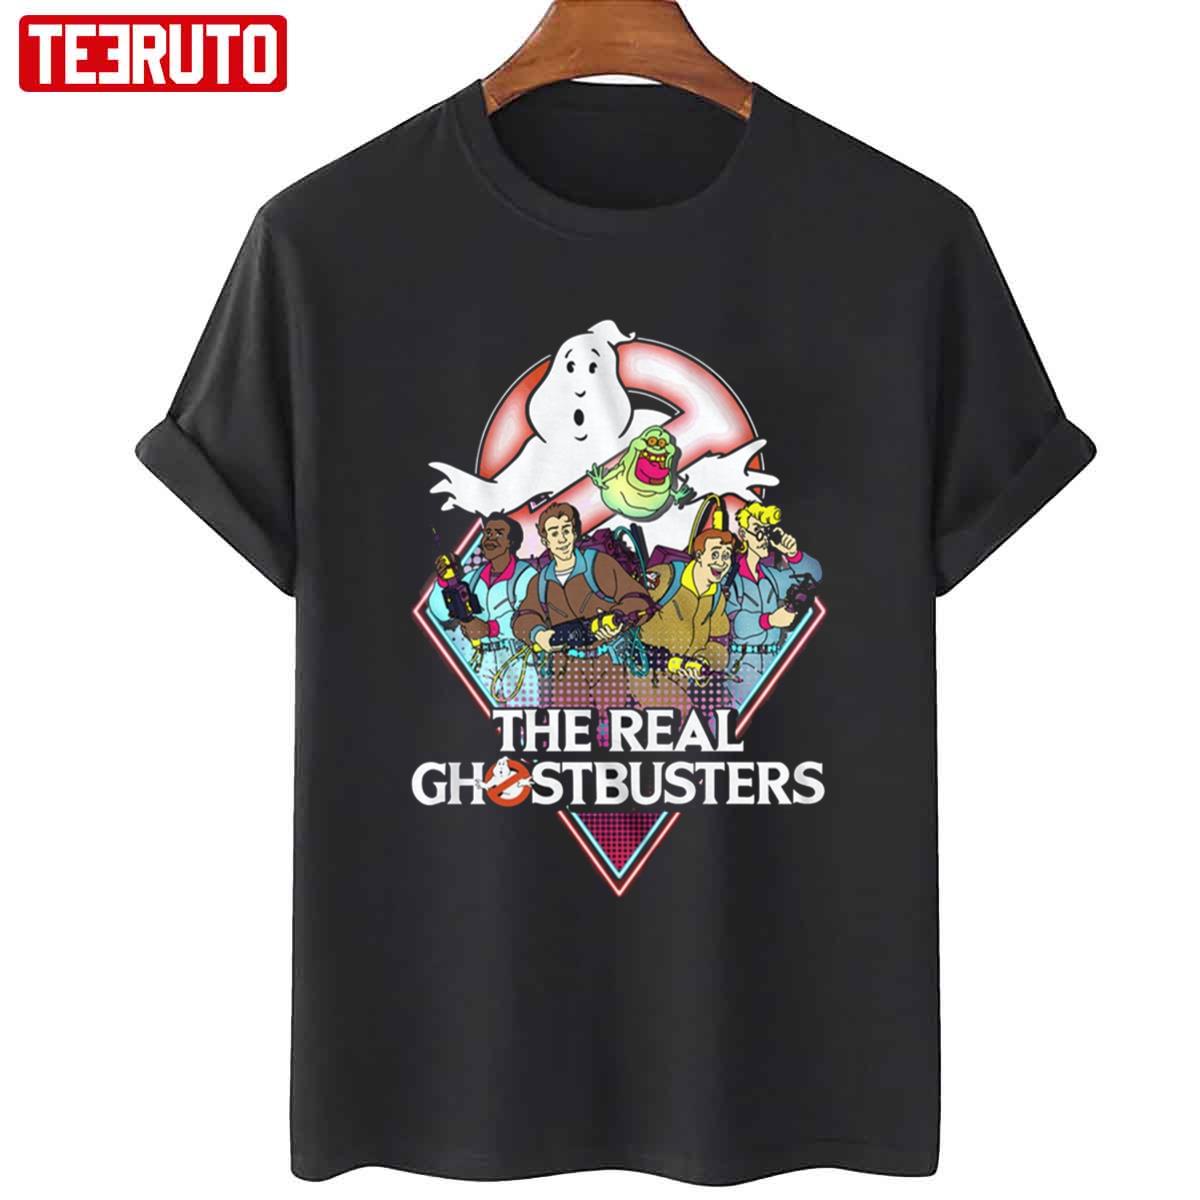 The Real Ghostbusters Unisex T-Shirt